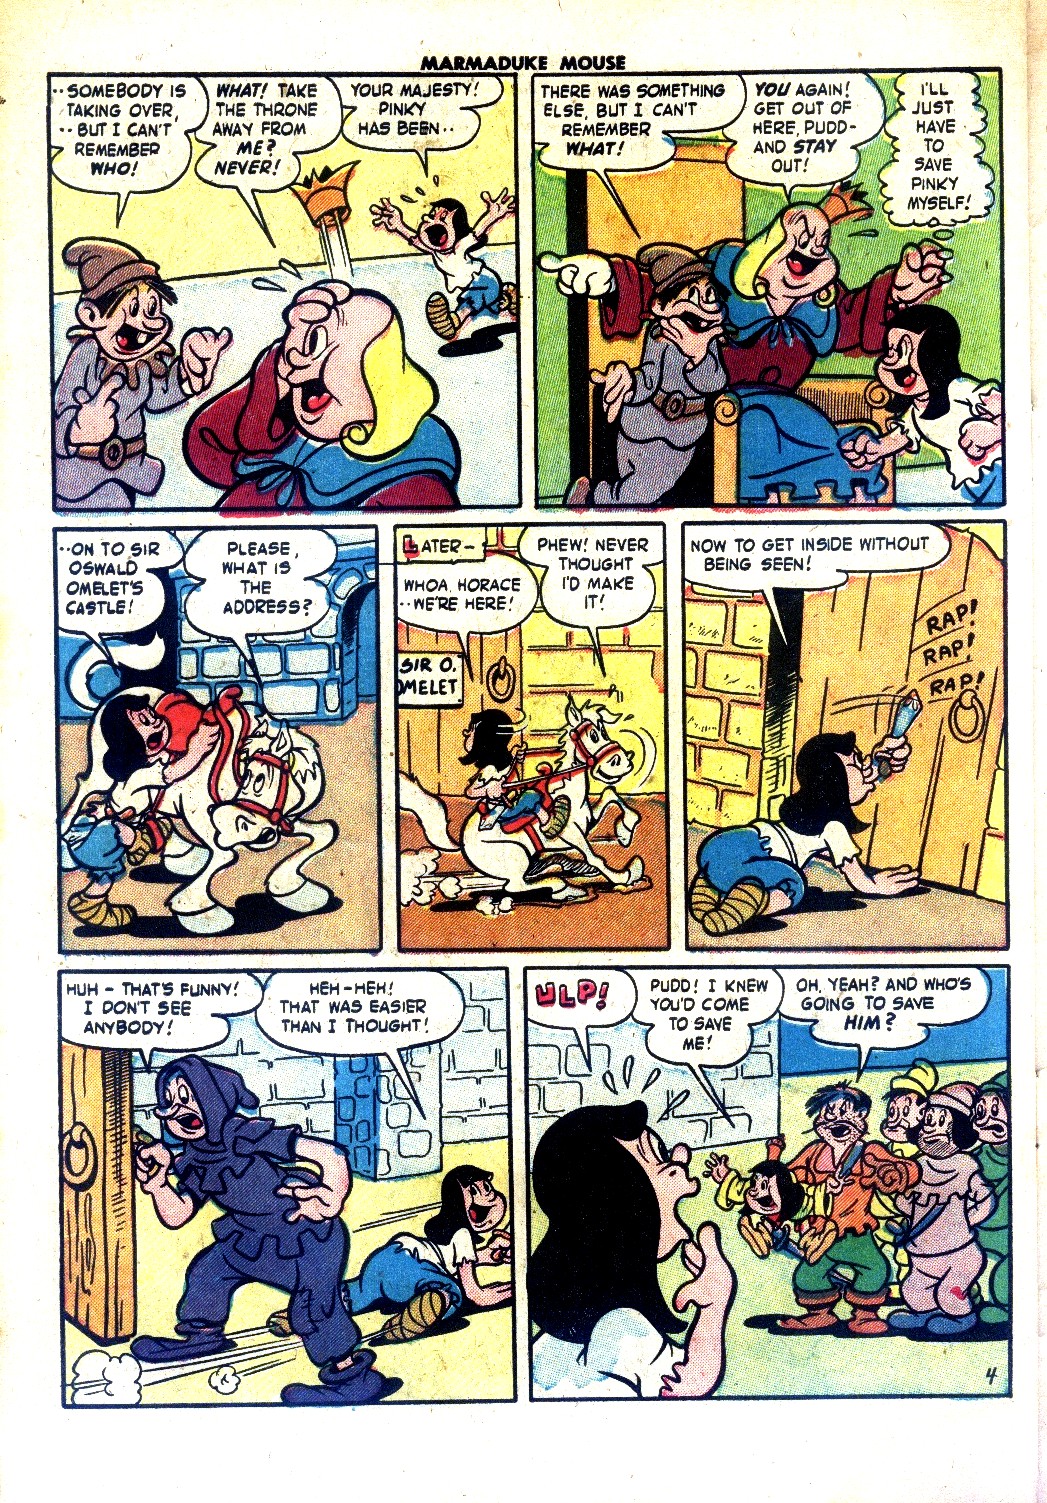 Read online Marmaduke Mouse comic -  Issue #40 - 30